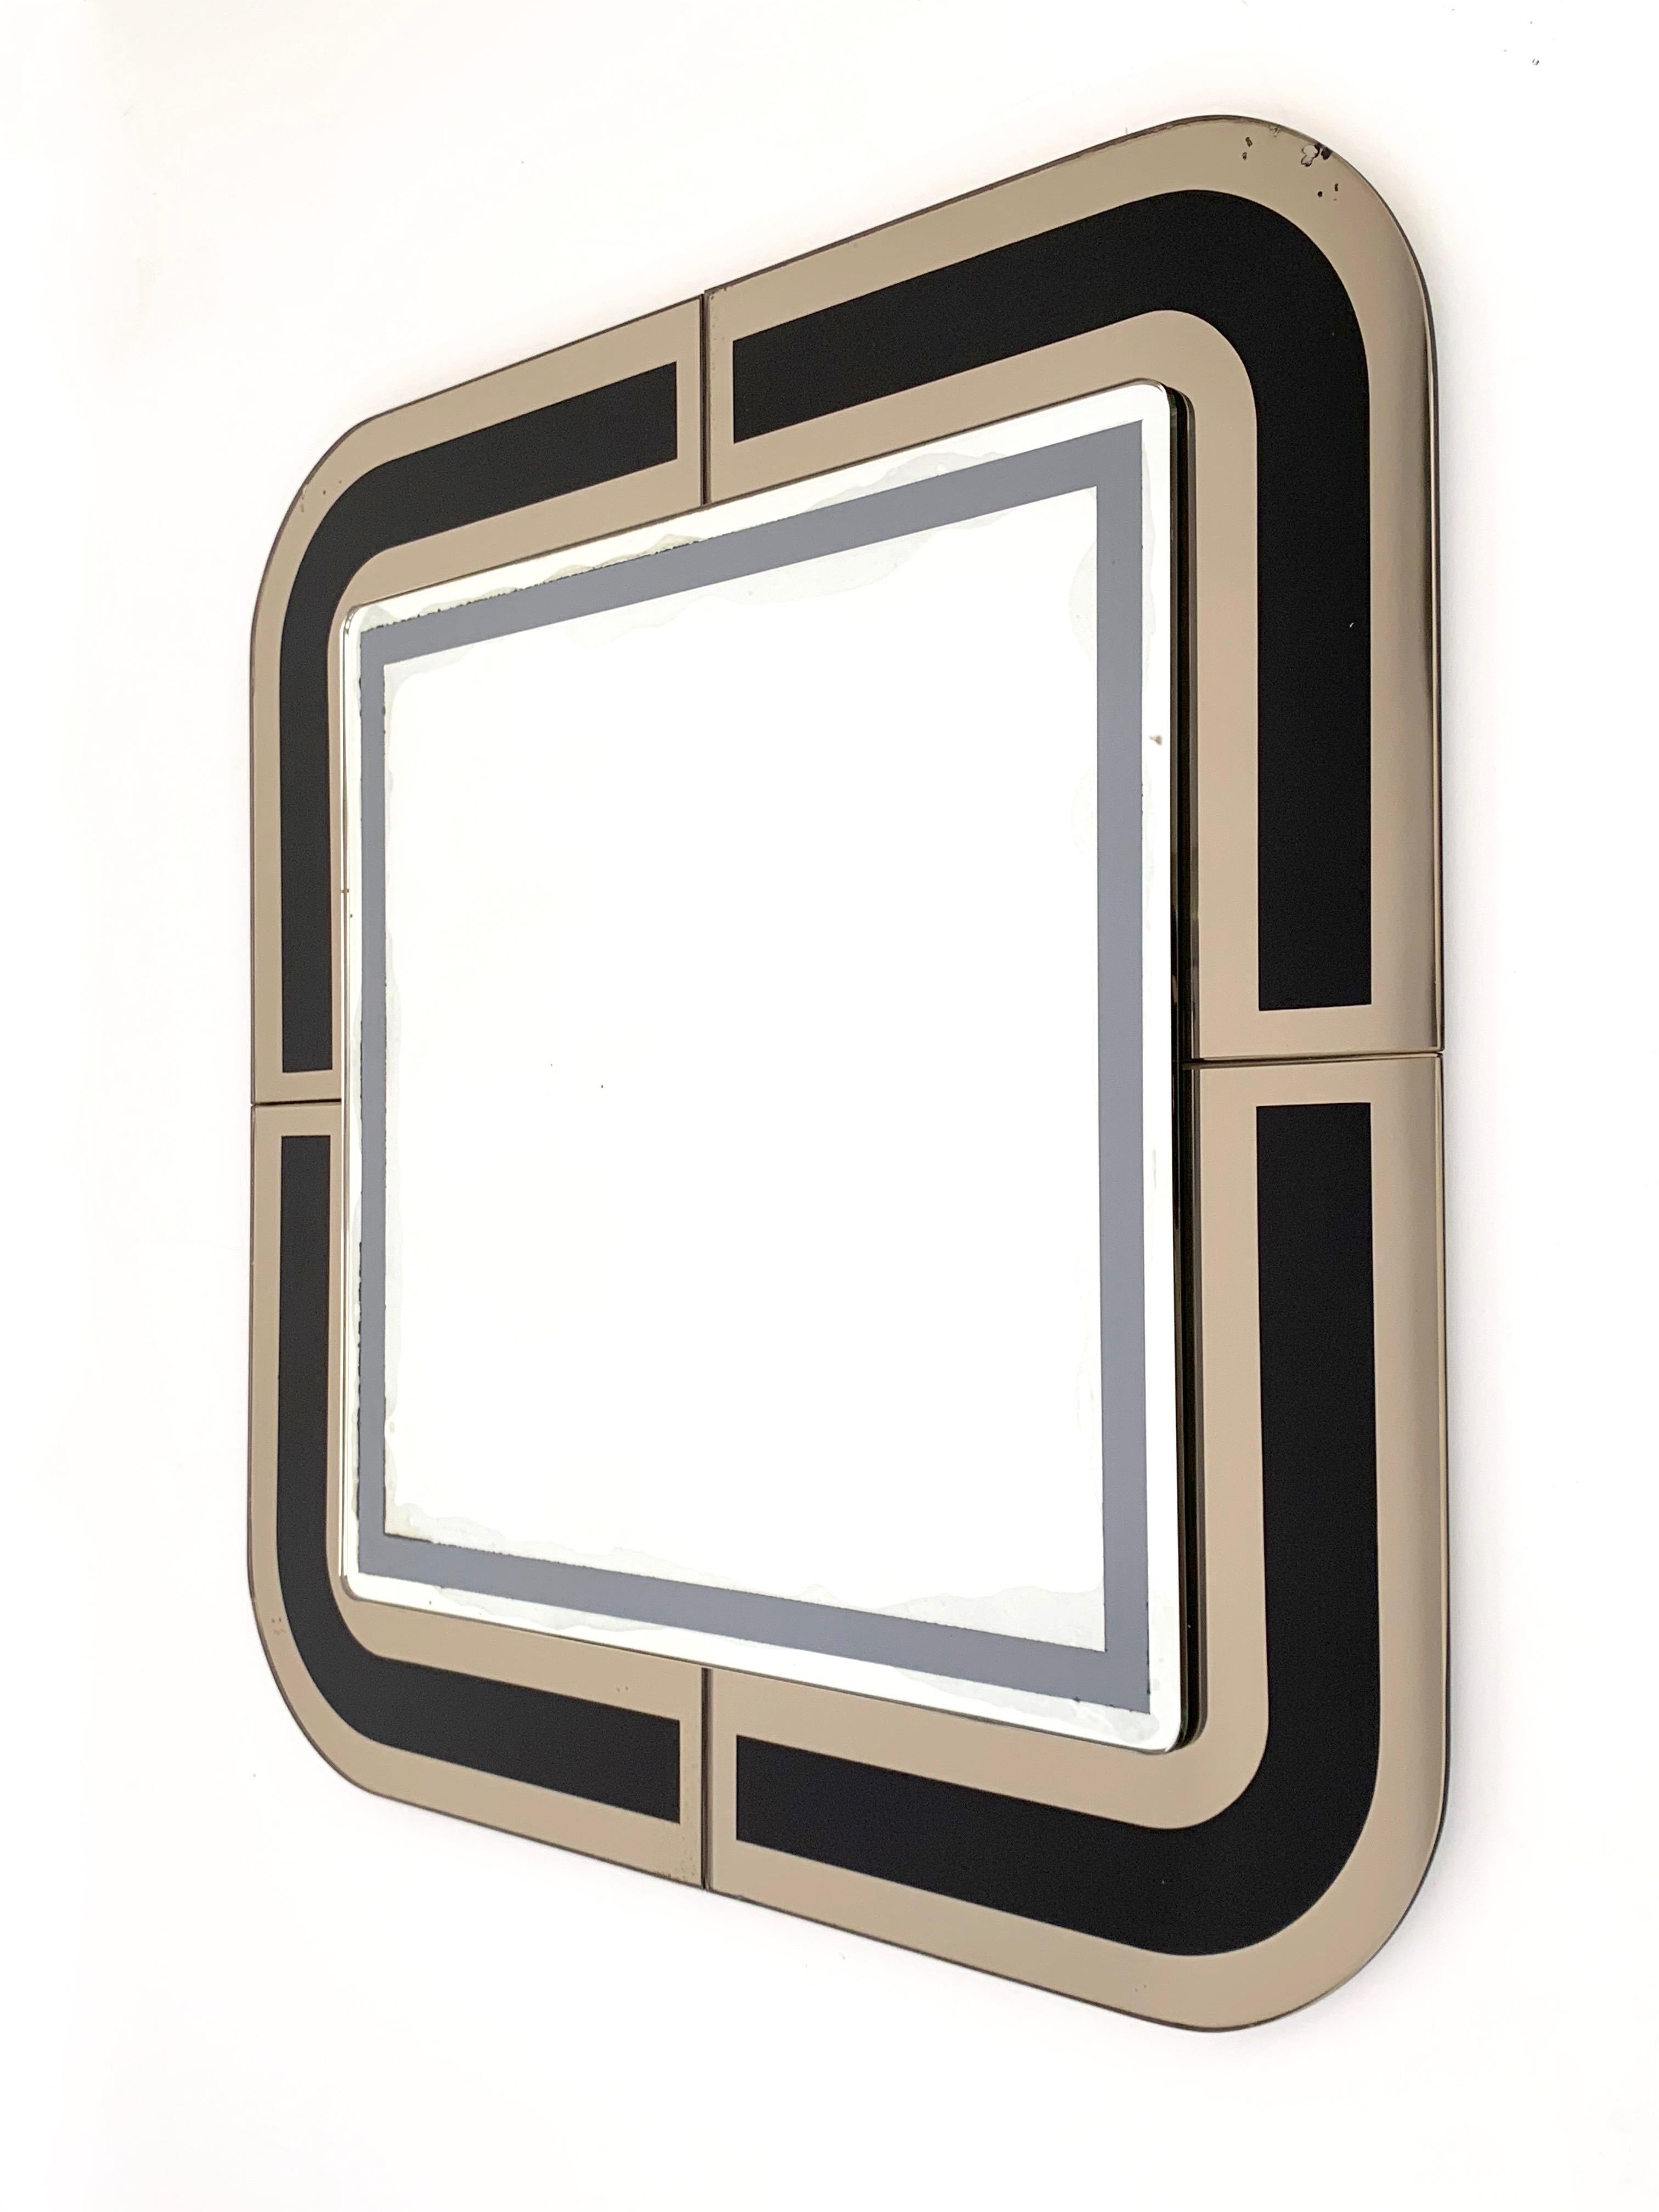 Amazing midcentury square mirror with a double frame. This item was designed in Italy during the 1980s.

The strength of this piece is the double frame: the internal one is in silver and grey (50x50 cm) and the external is in mirrored bronze and